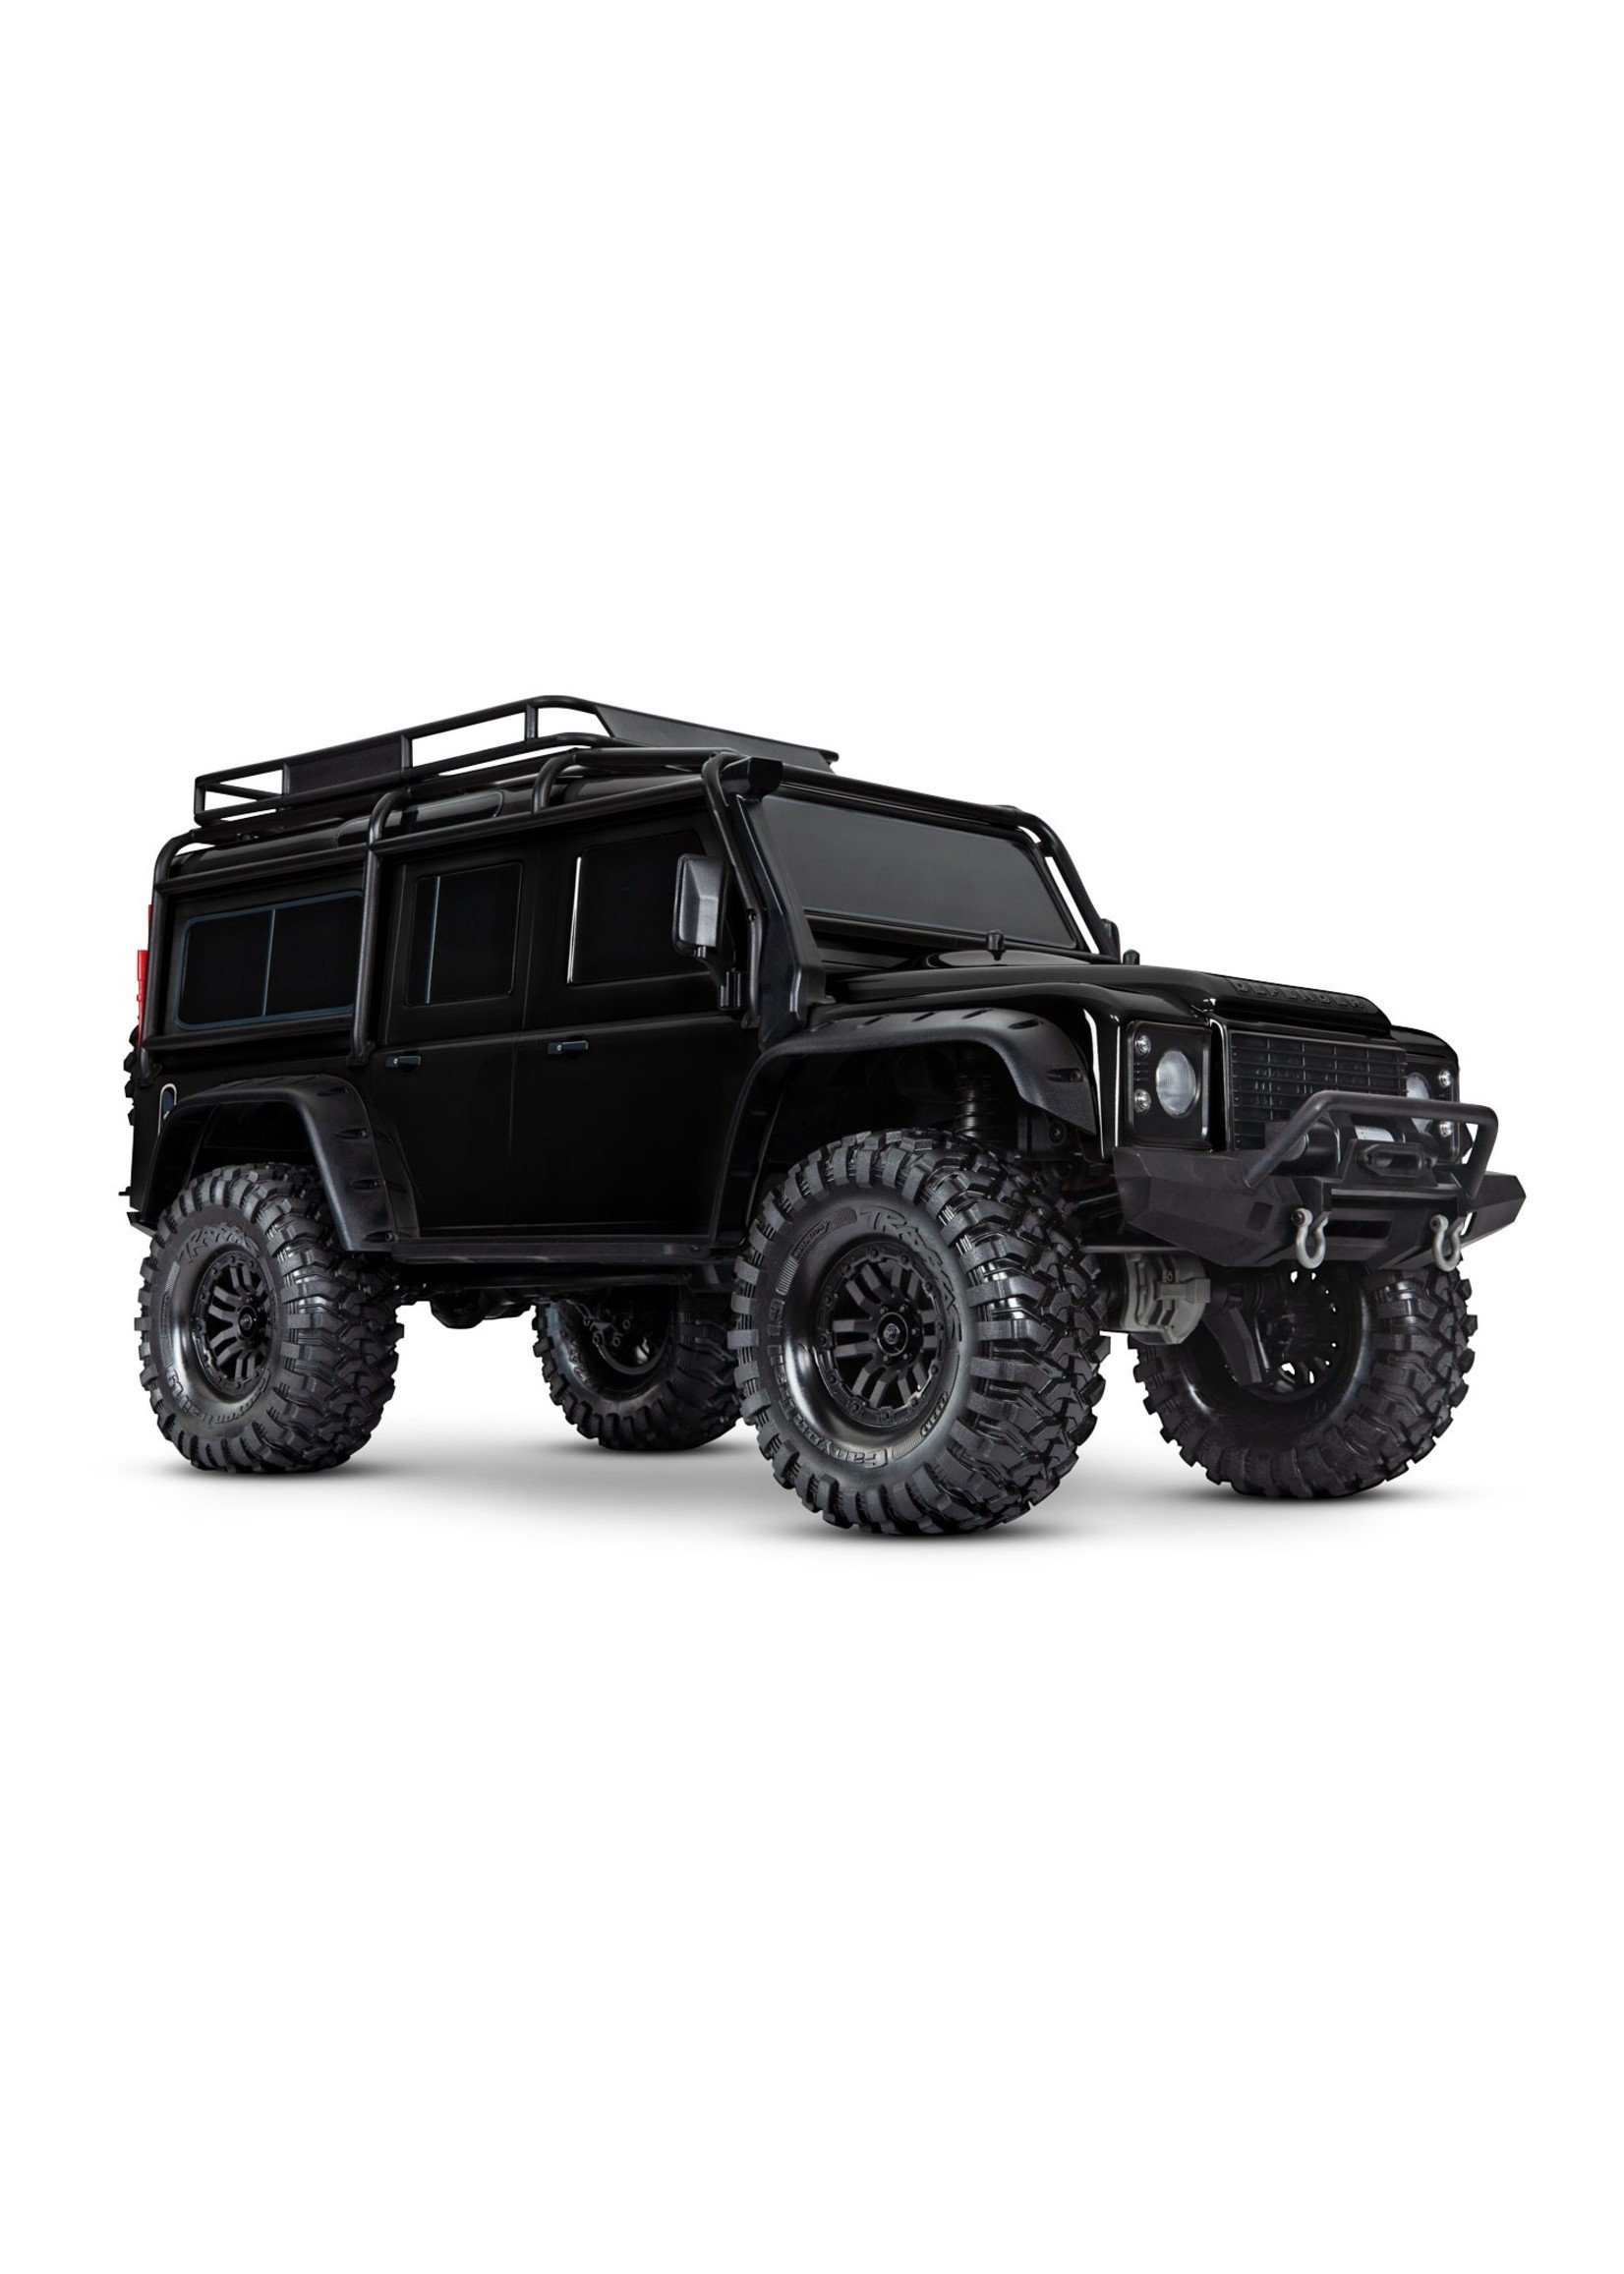 Traxxas 1/10 TRX-4 Defender RTR Scale and Trail Crawler - Black